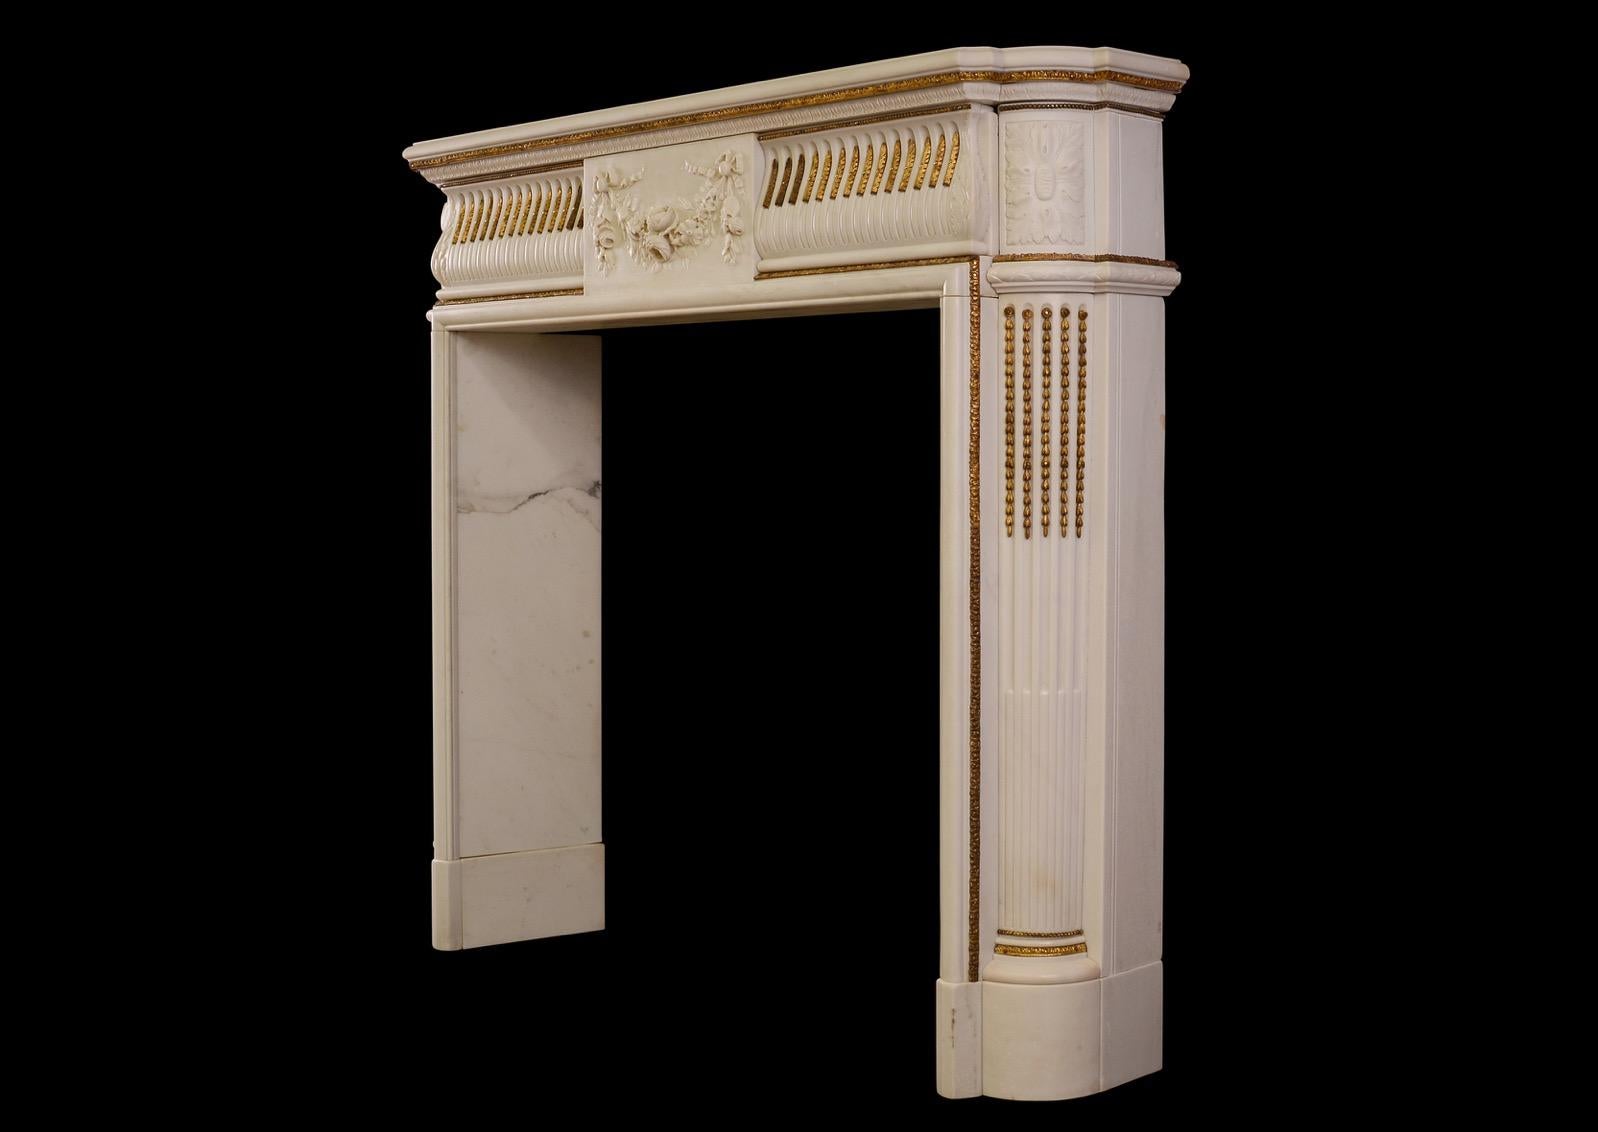 English Regency Statuary Marble Fireplace with Inlaid Brass Ormolu For Sale 2